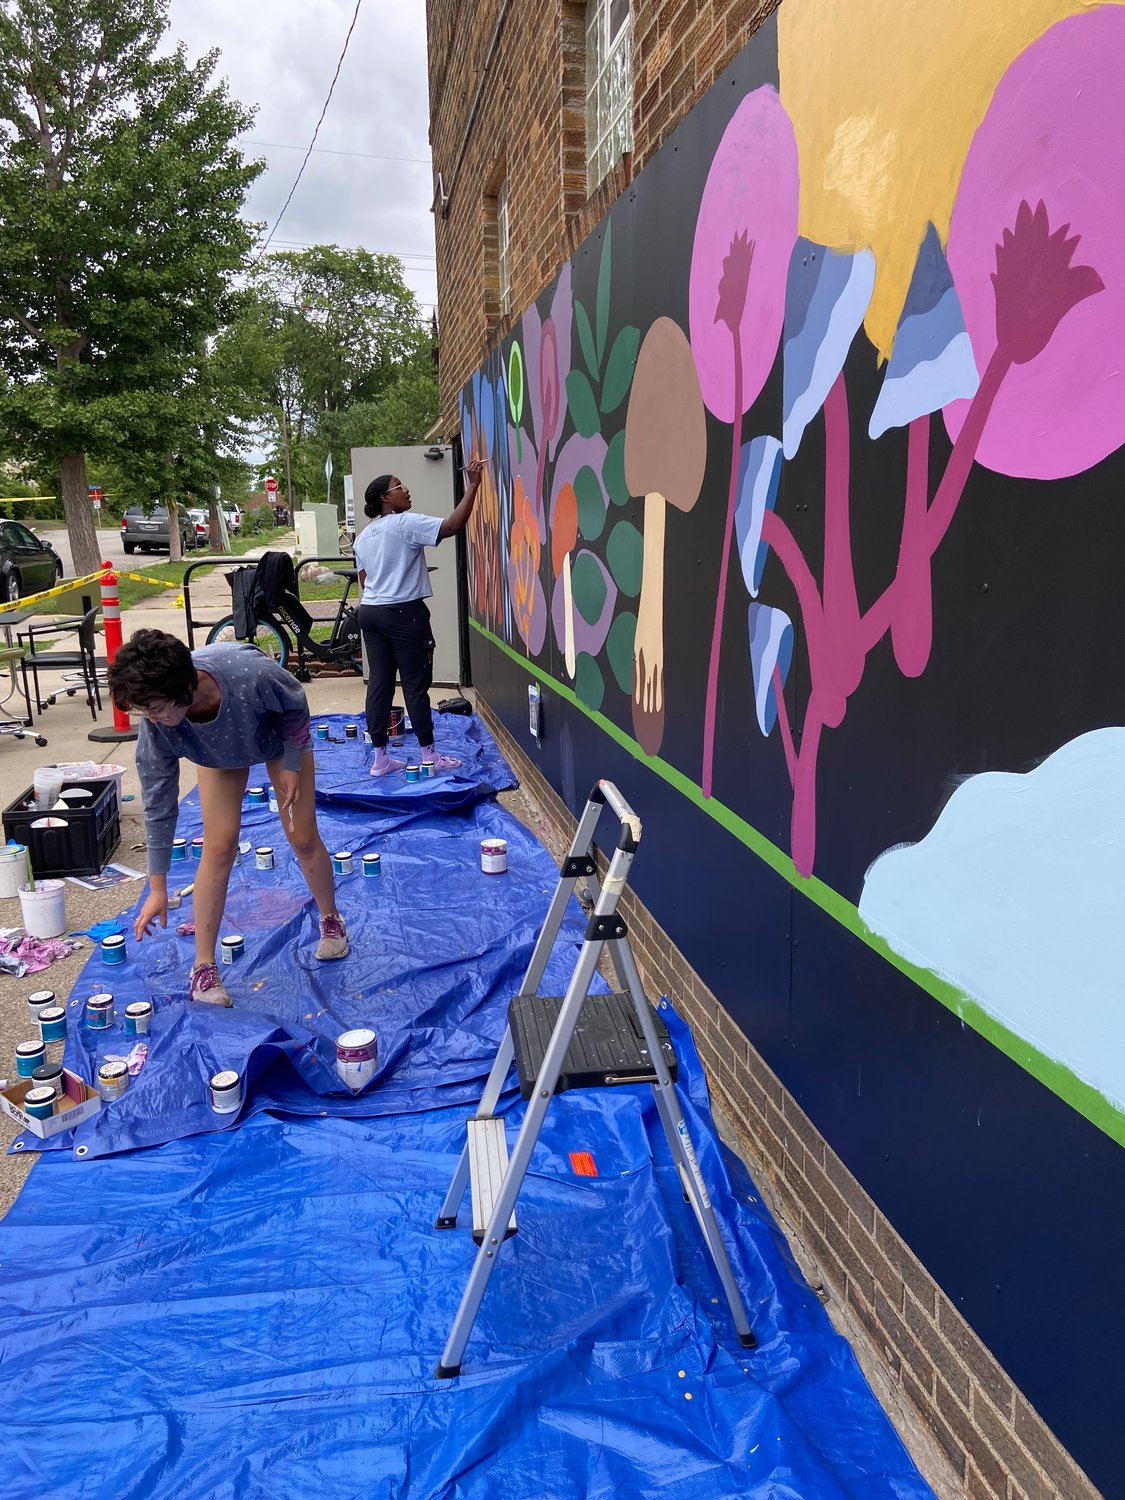 The Nicollet Pop-off mural was of various mushrooms that inspired community through their connected root system.